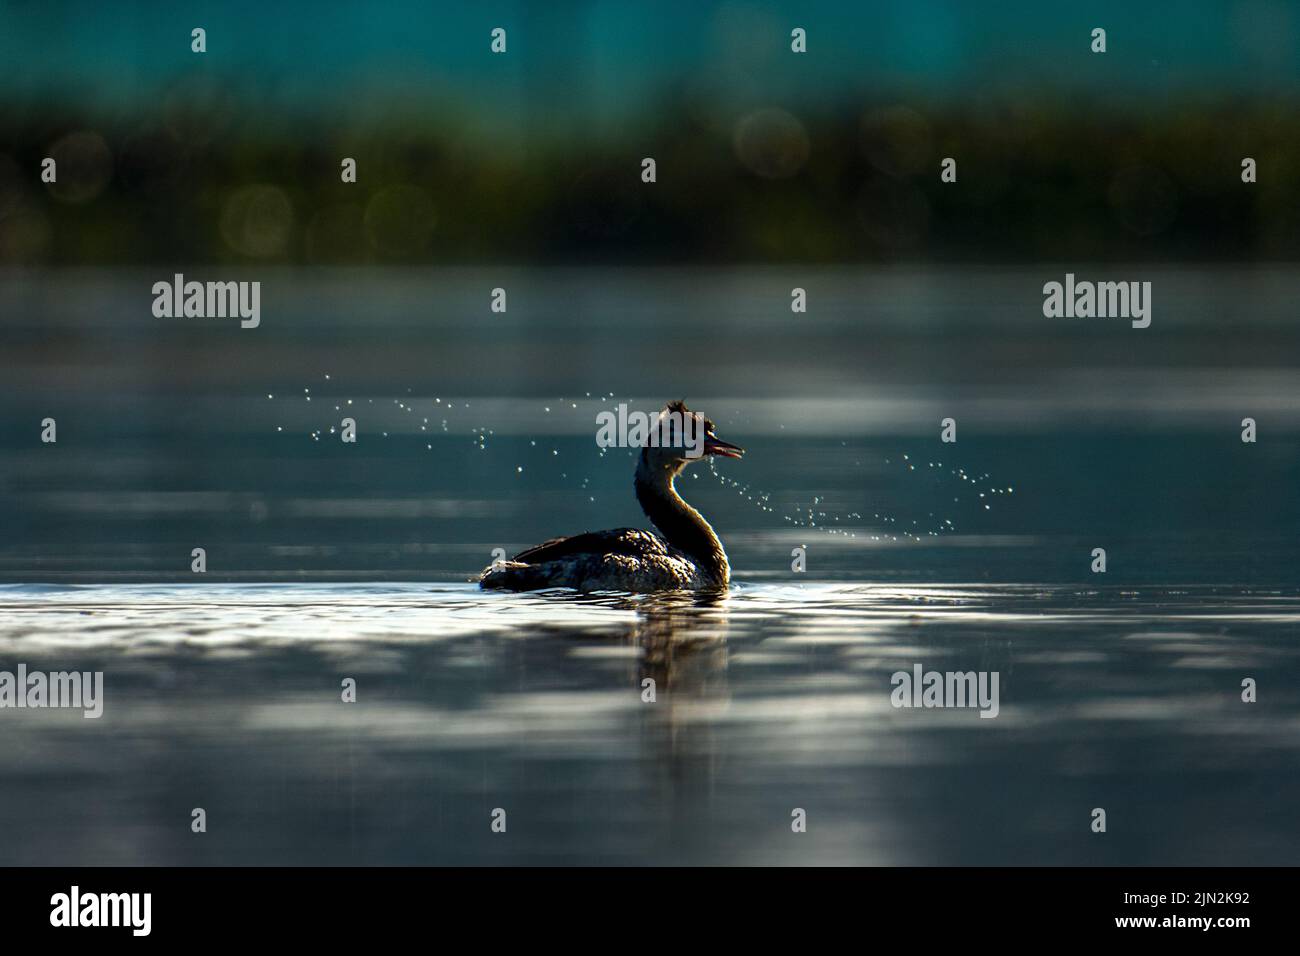 A great grebe (Podiceps major) floating in the river Stock Photo